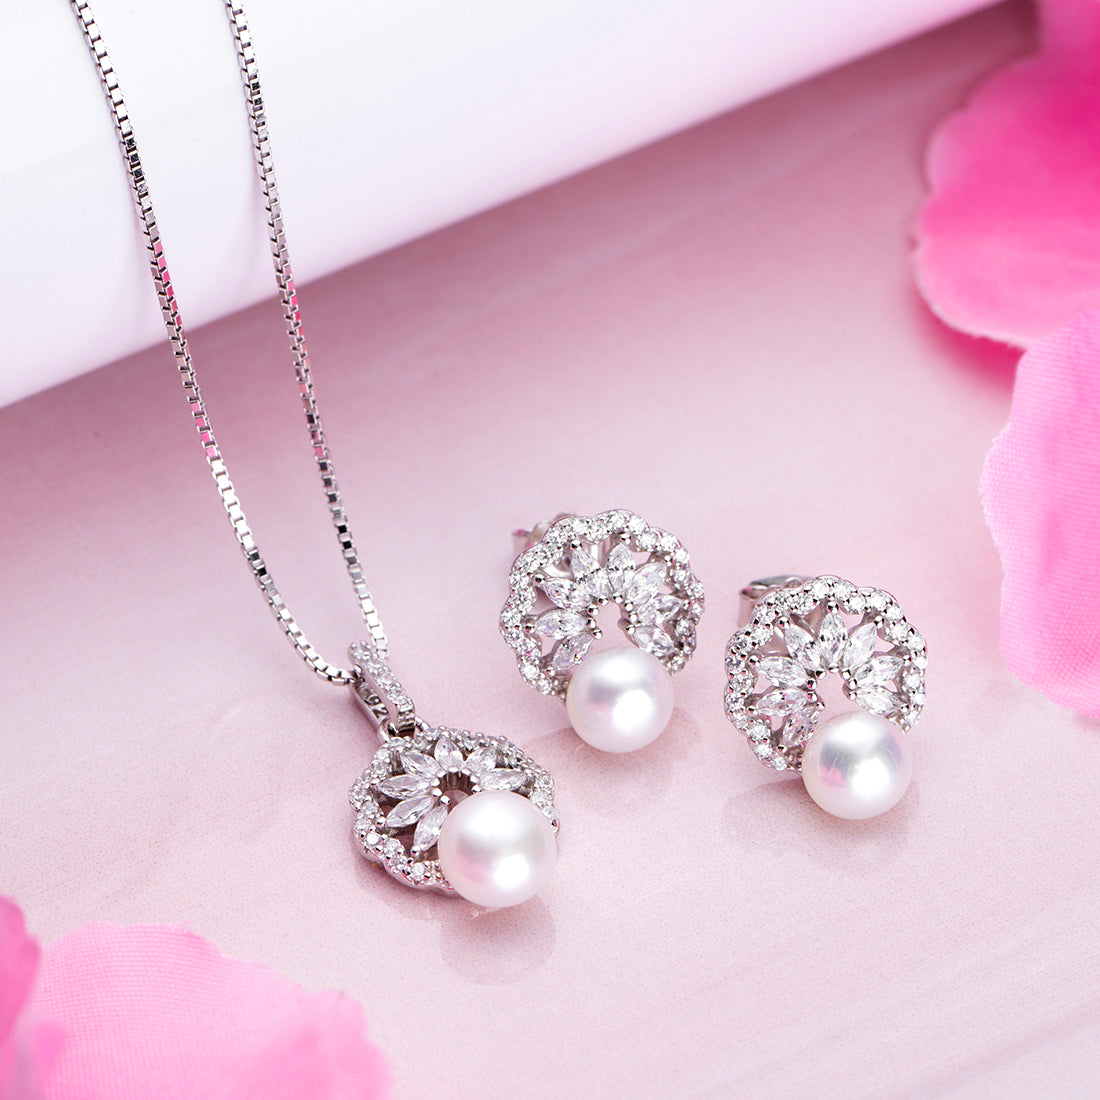 Blooming Elegance Rhodium Plated 925 Sterling Silver Jewelry Set